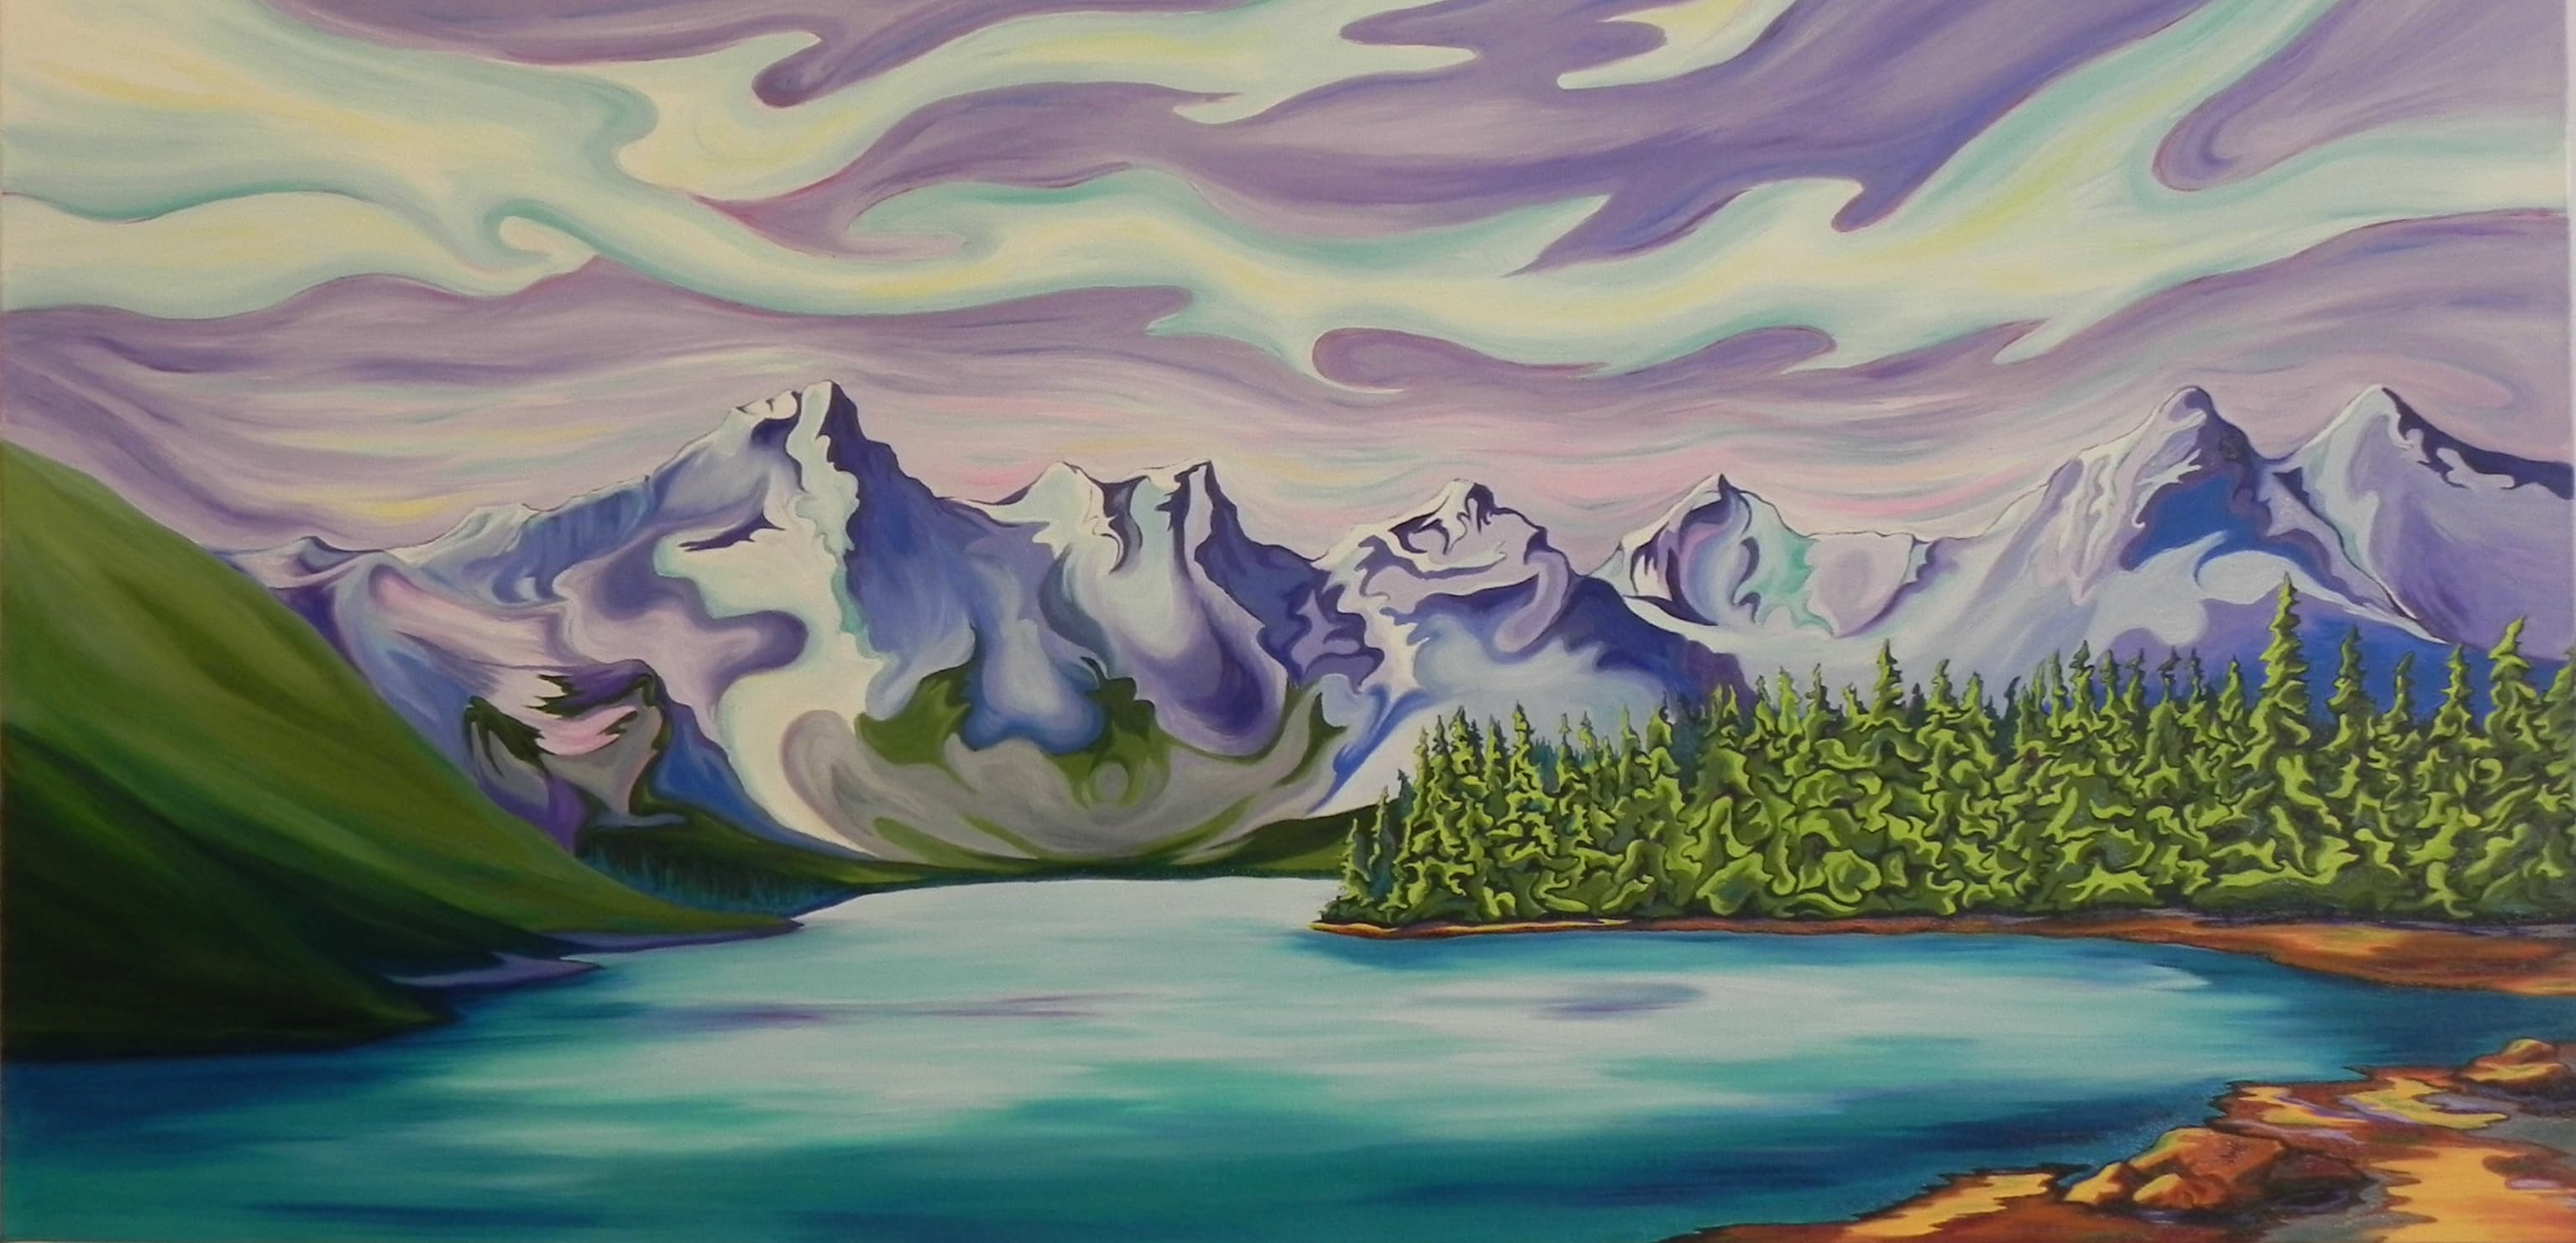 Banff oil painting by Janice Gallant thecreationguild.com